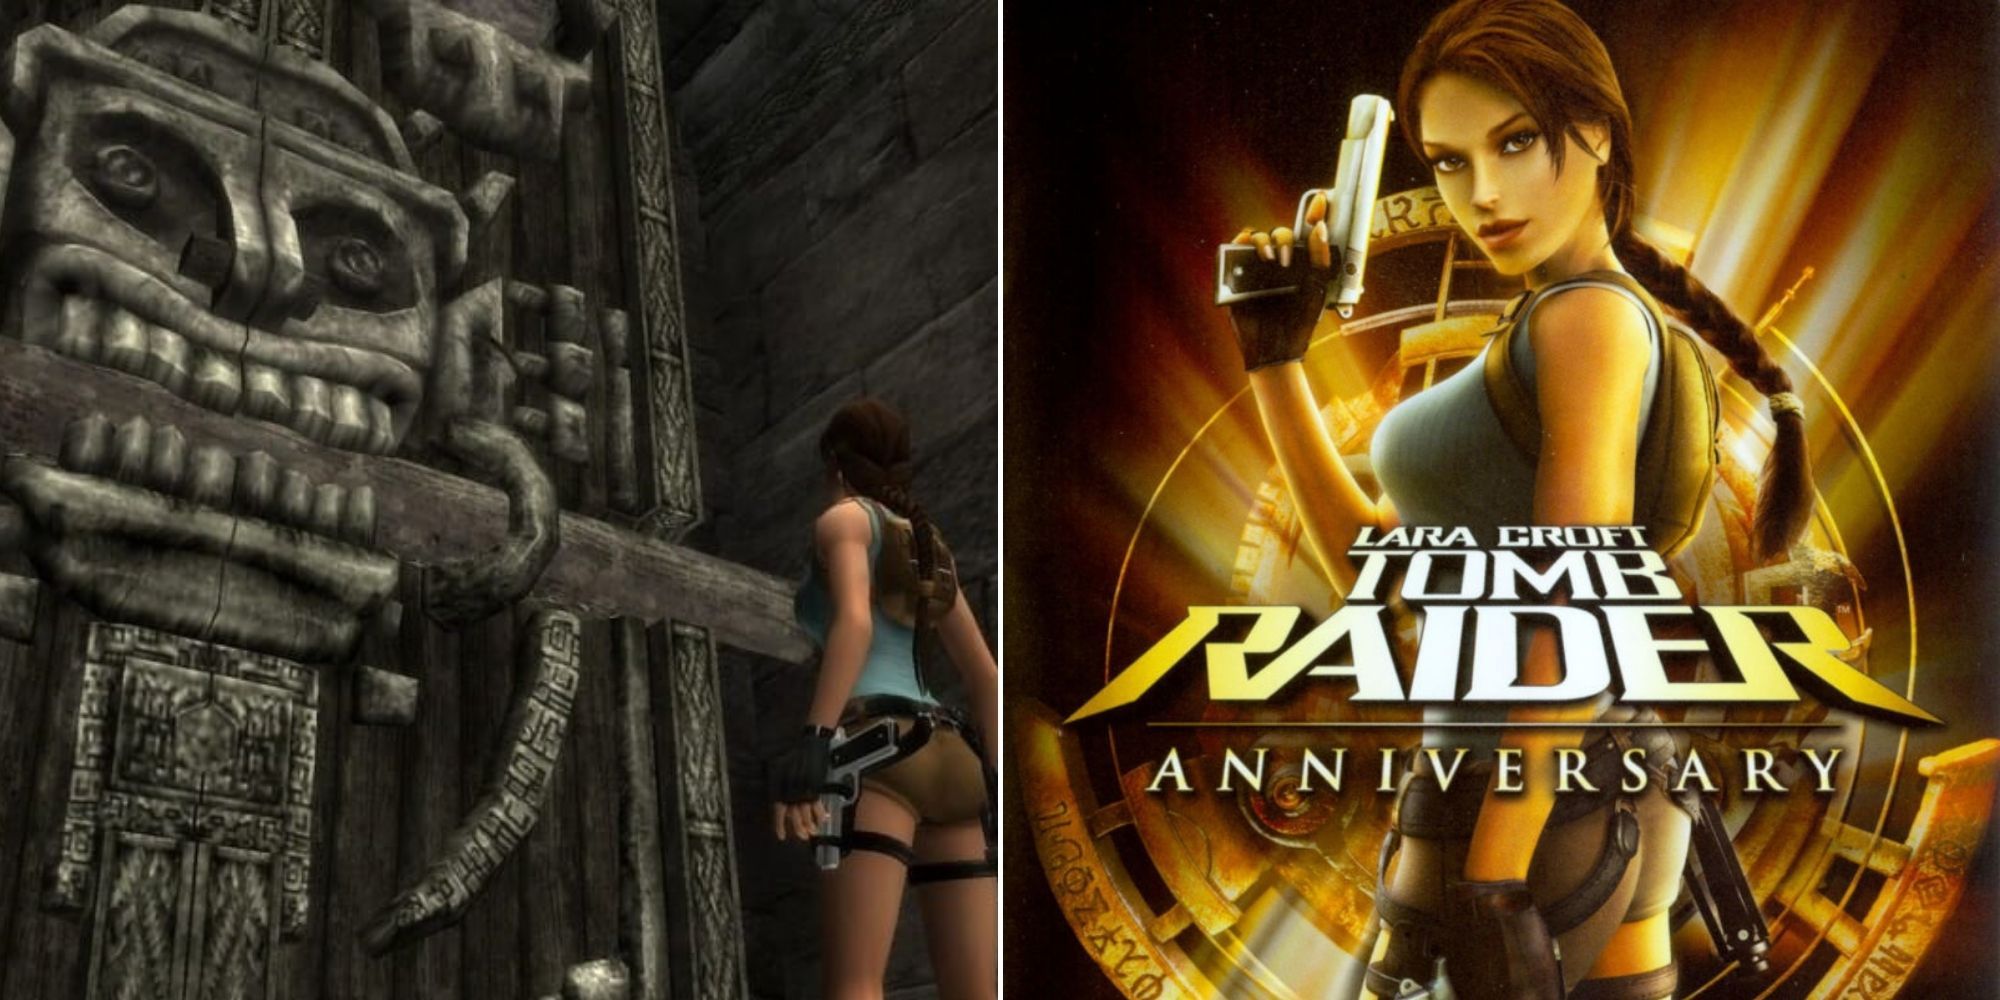 Lara Croft outside a large ancient door and The Cover Art For Tomb Raider: Anniversary